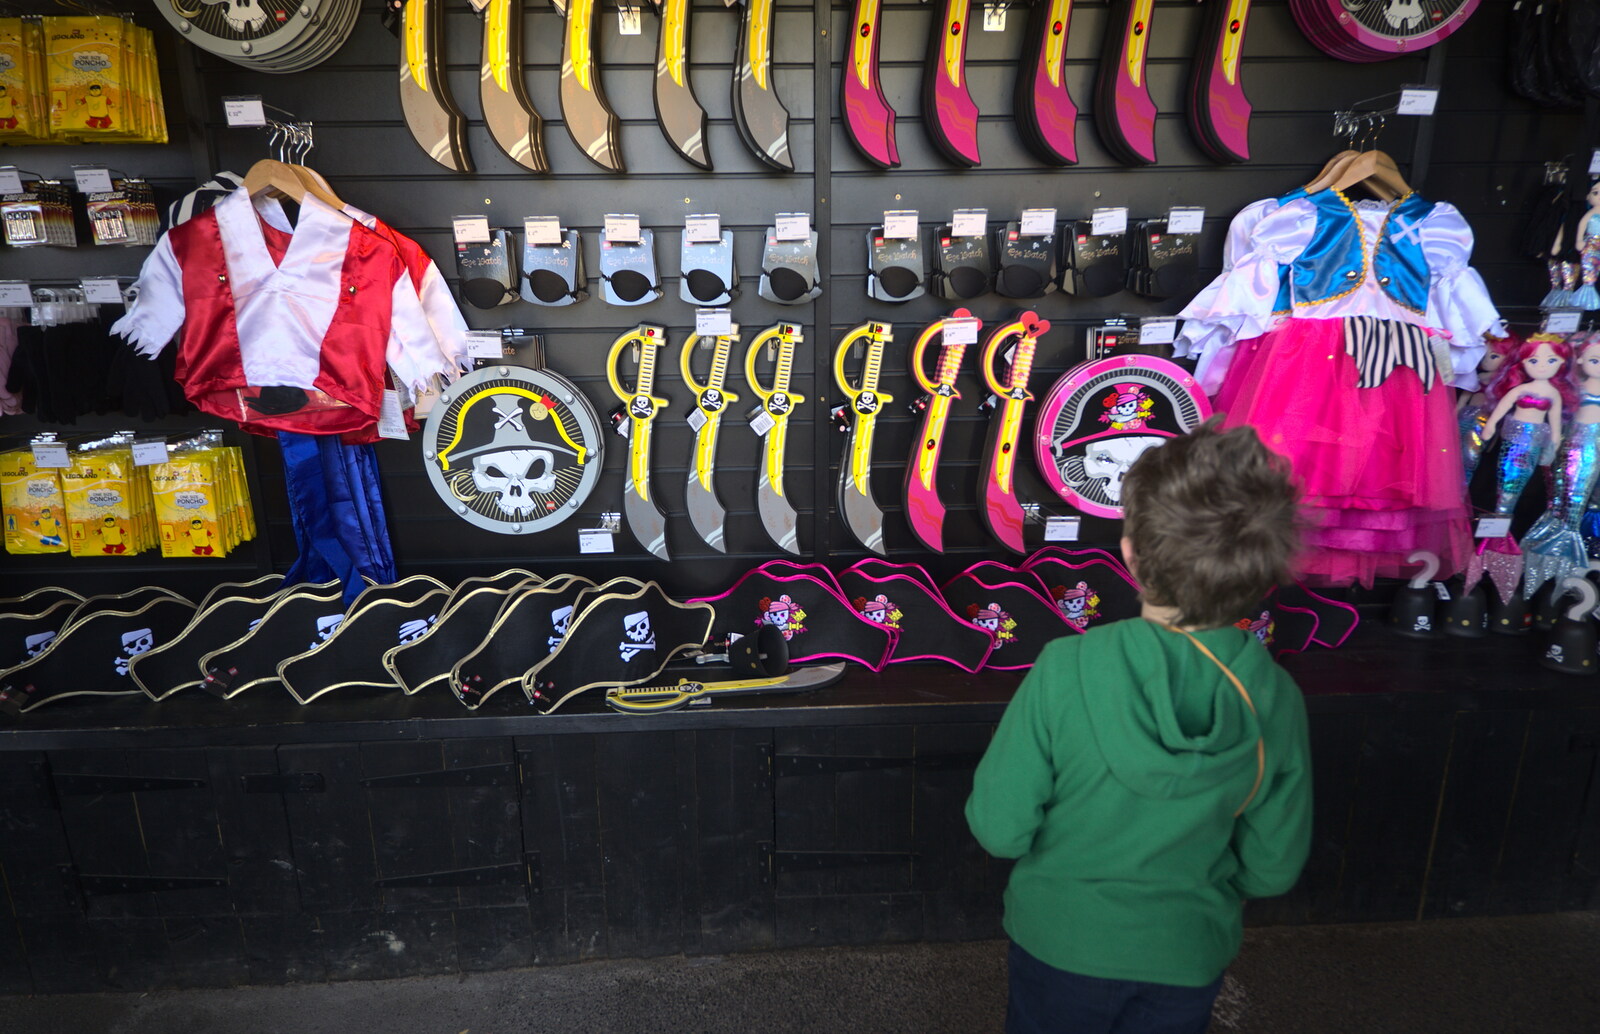 Fred looks at knives and stabbing weapons from A Trip to Legoland, Windsor, Berkshire - 25th March 2017